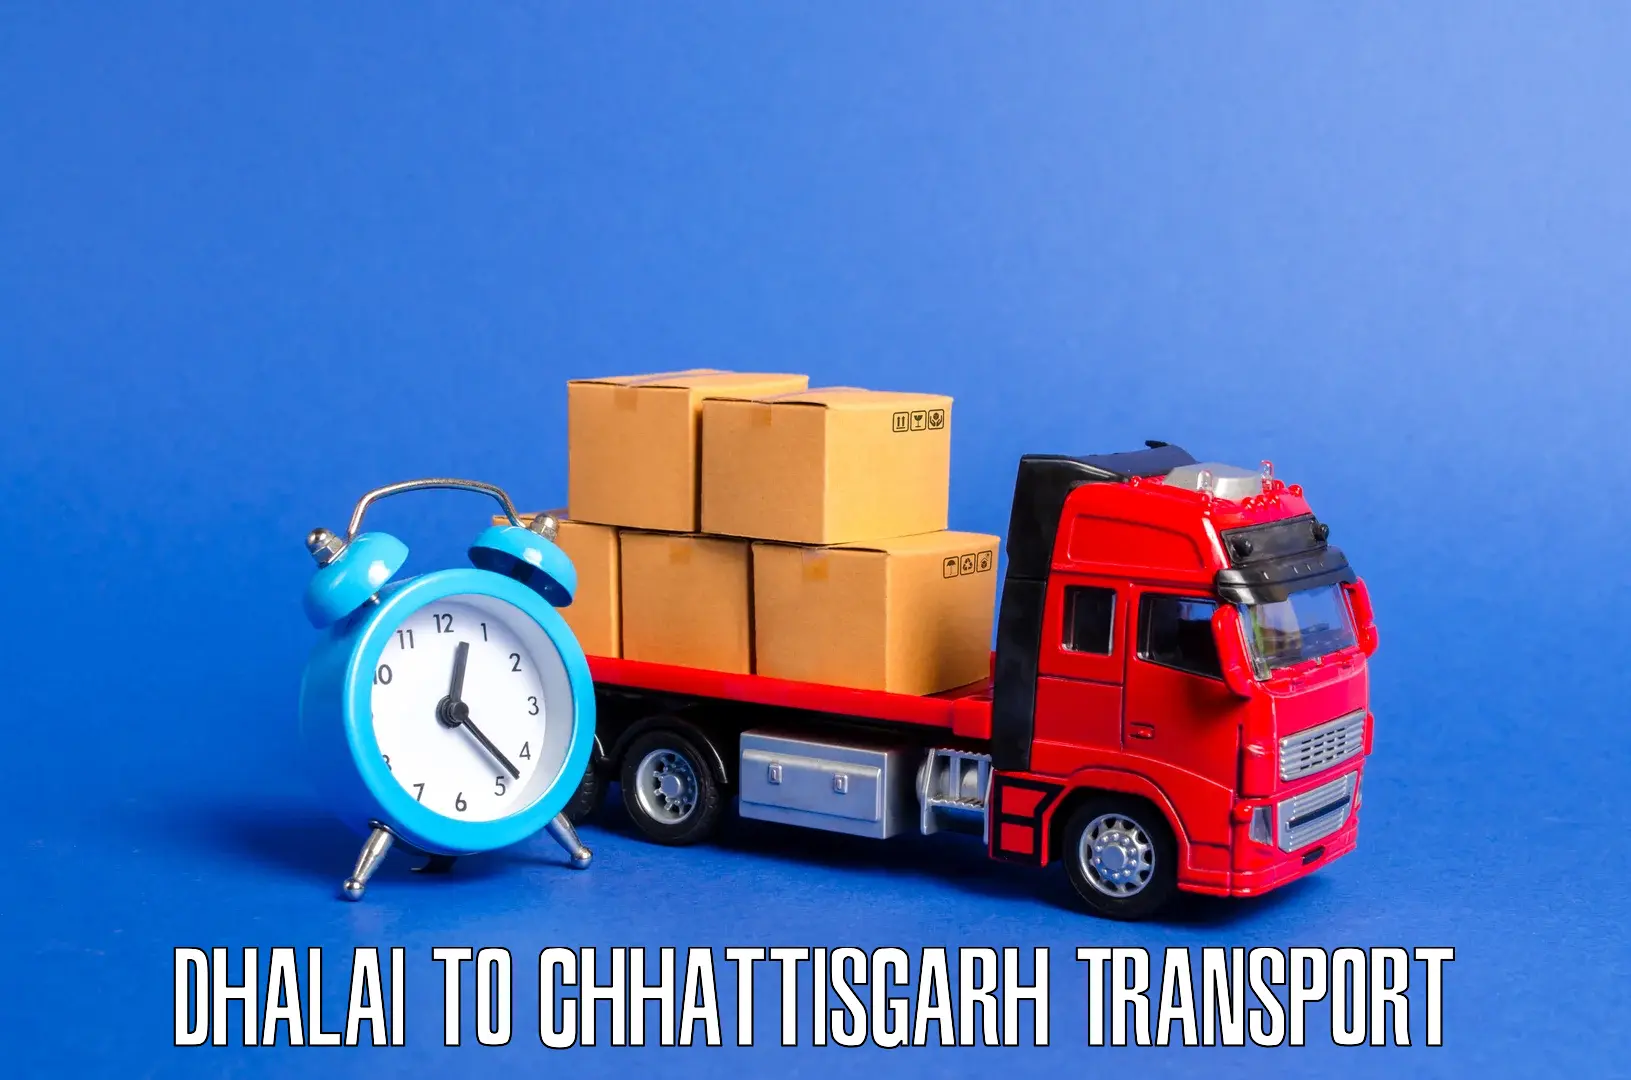 Cargo train transport services in Dhalai to Jagdalpur